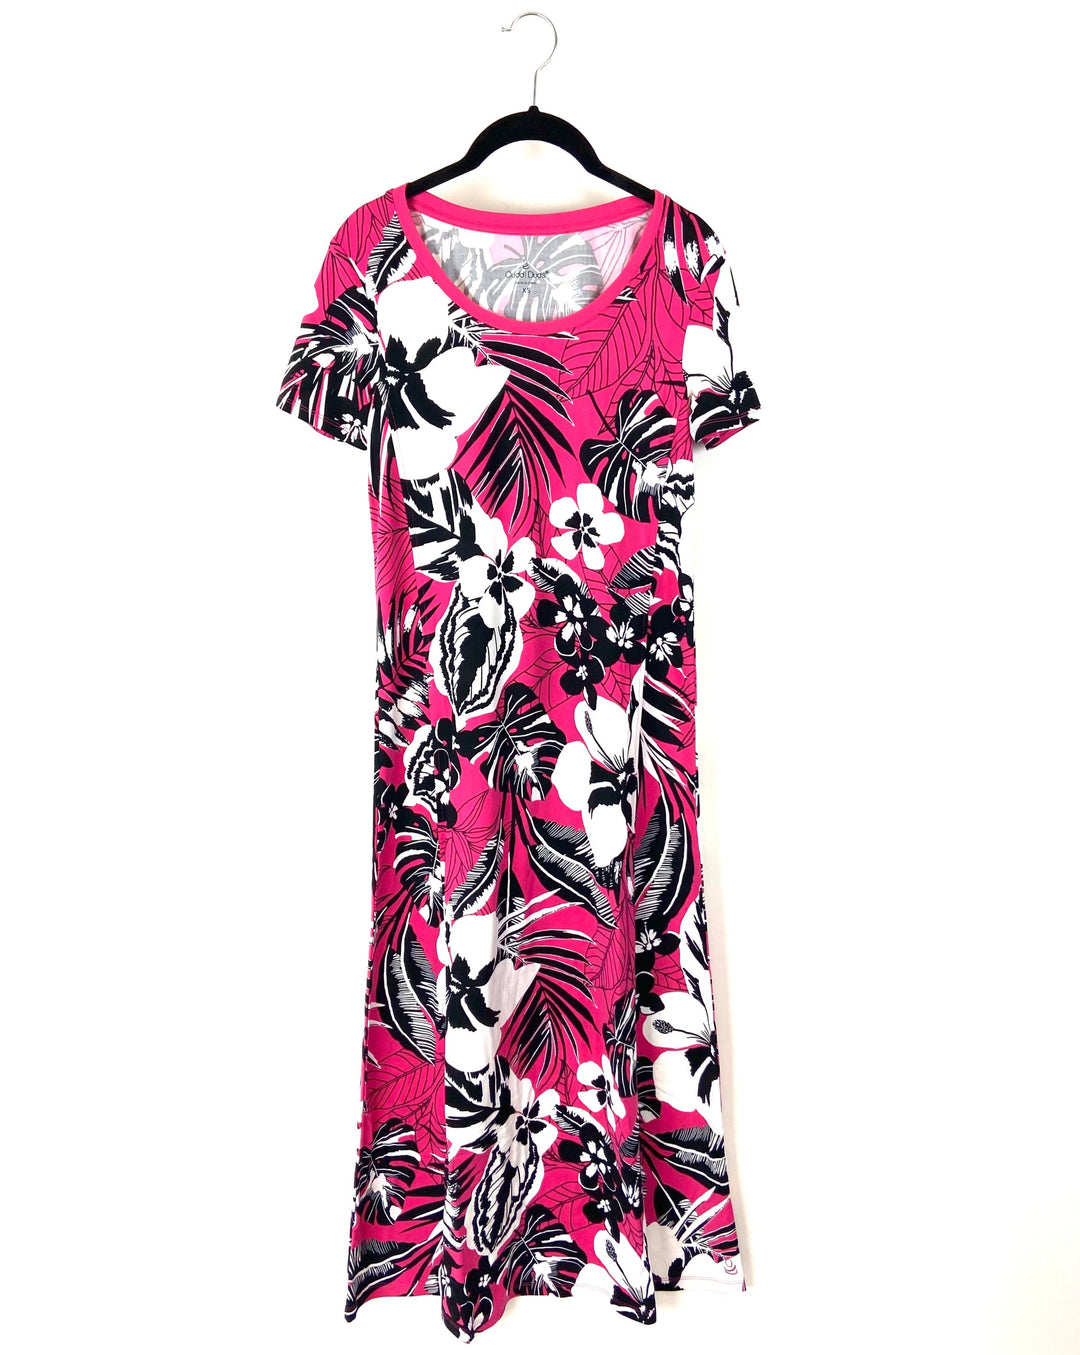 Pink, Black and White Floral Maxi Dress - Medium And 1X